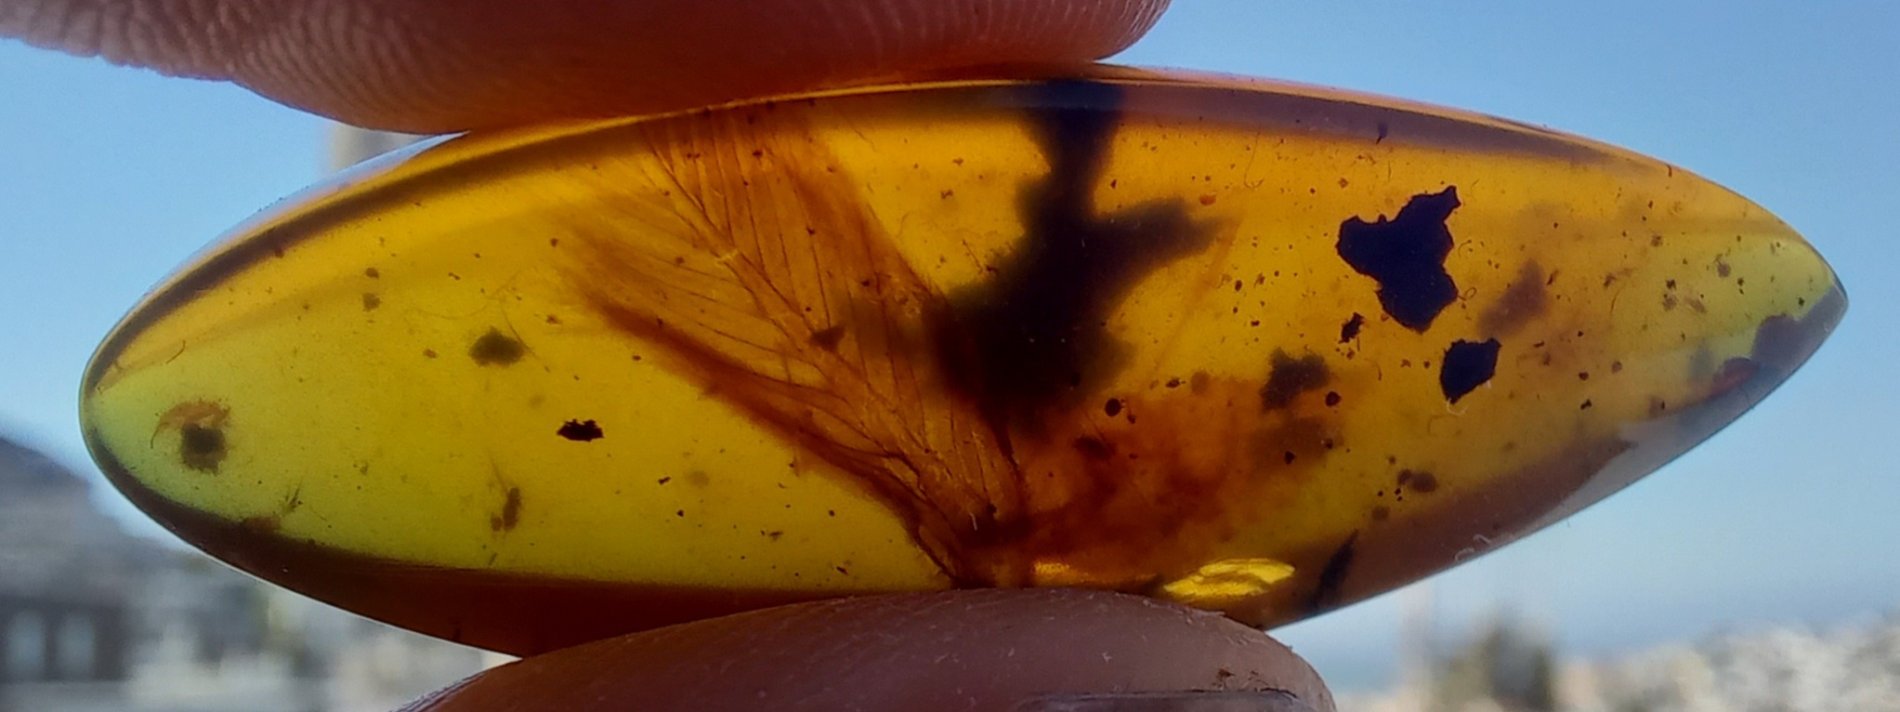 Dinosaur Tail With Streamer Feathers in Amber